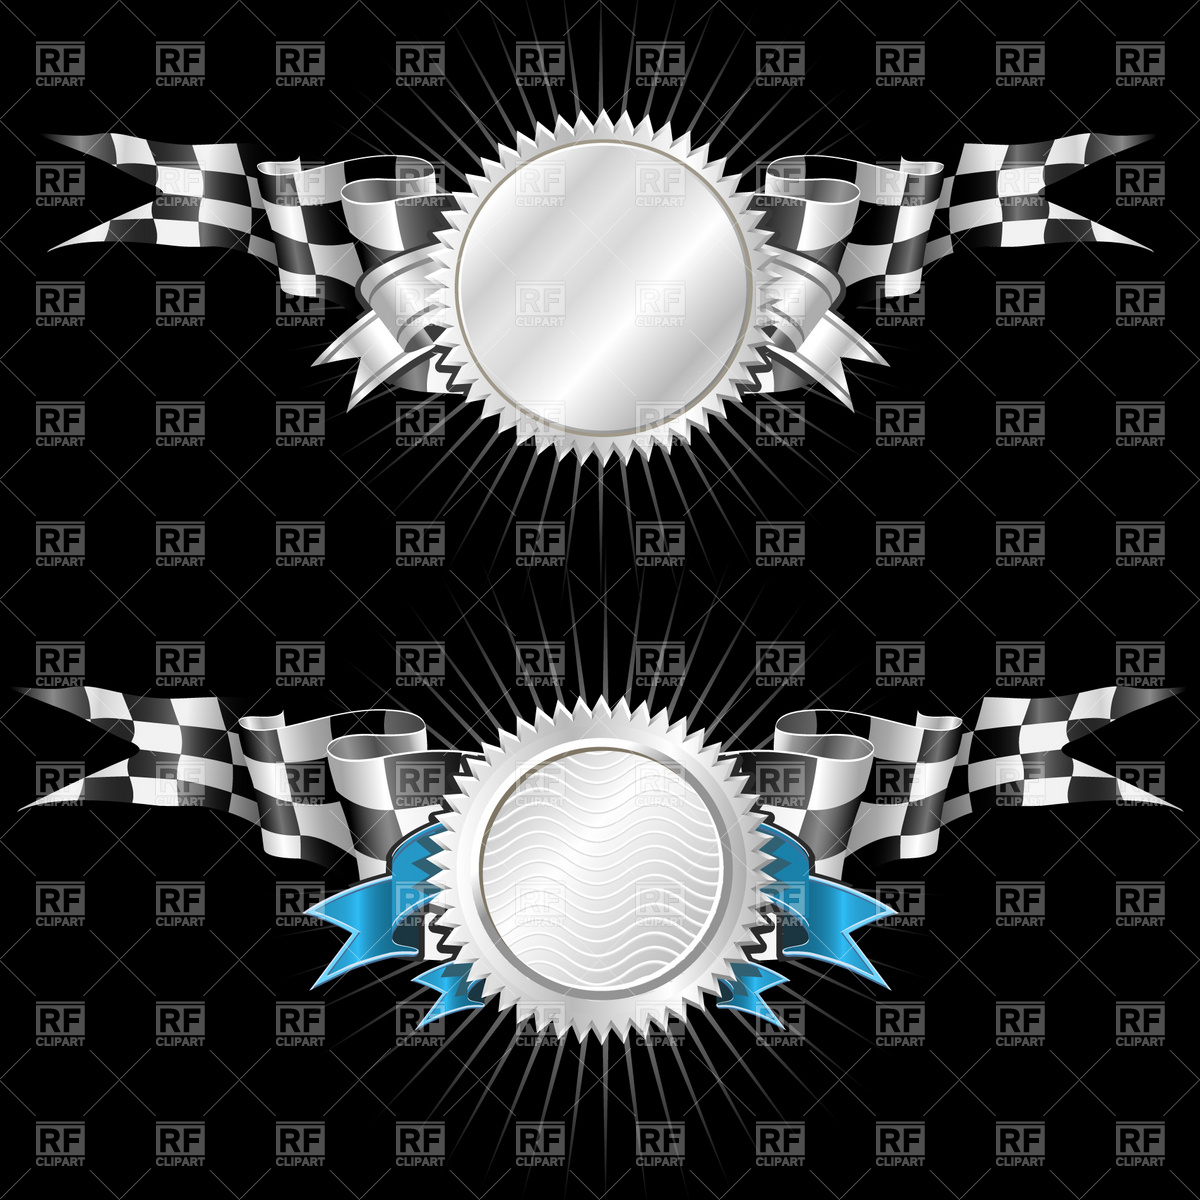 Silver racing emblem templates with checkered flag 4704 Sport and 1200x1200